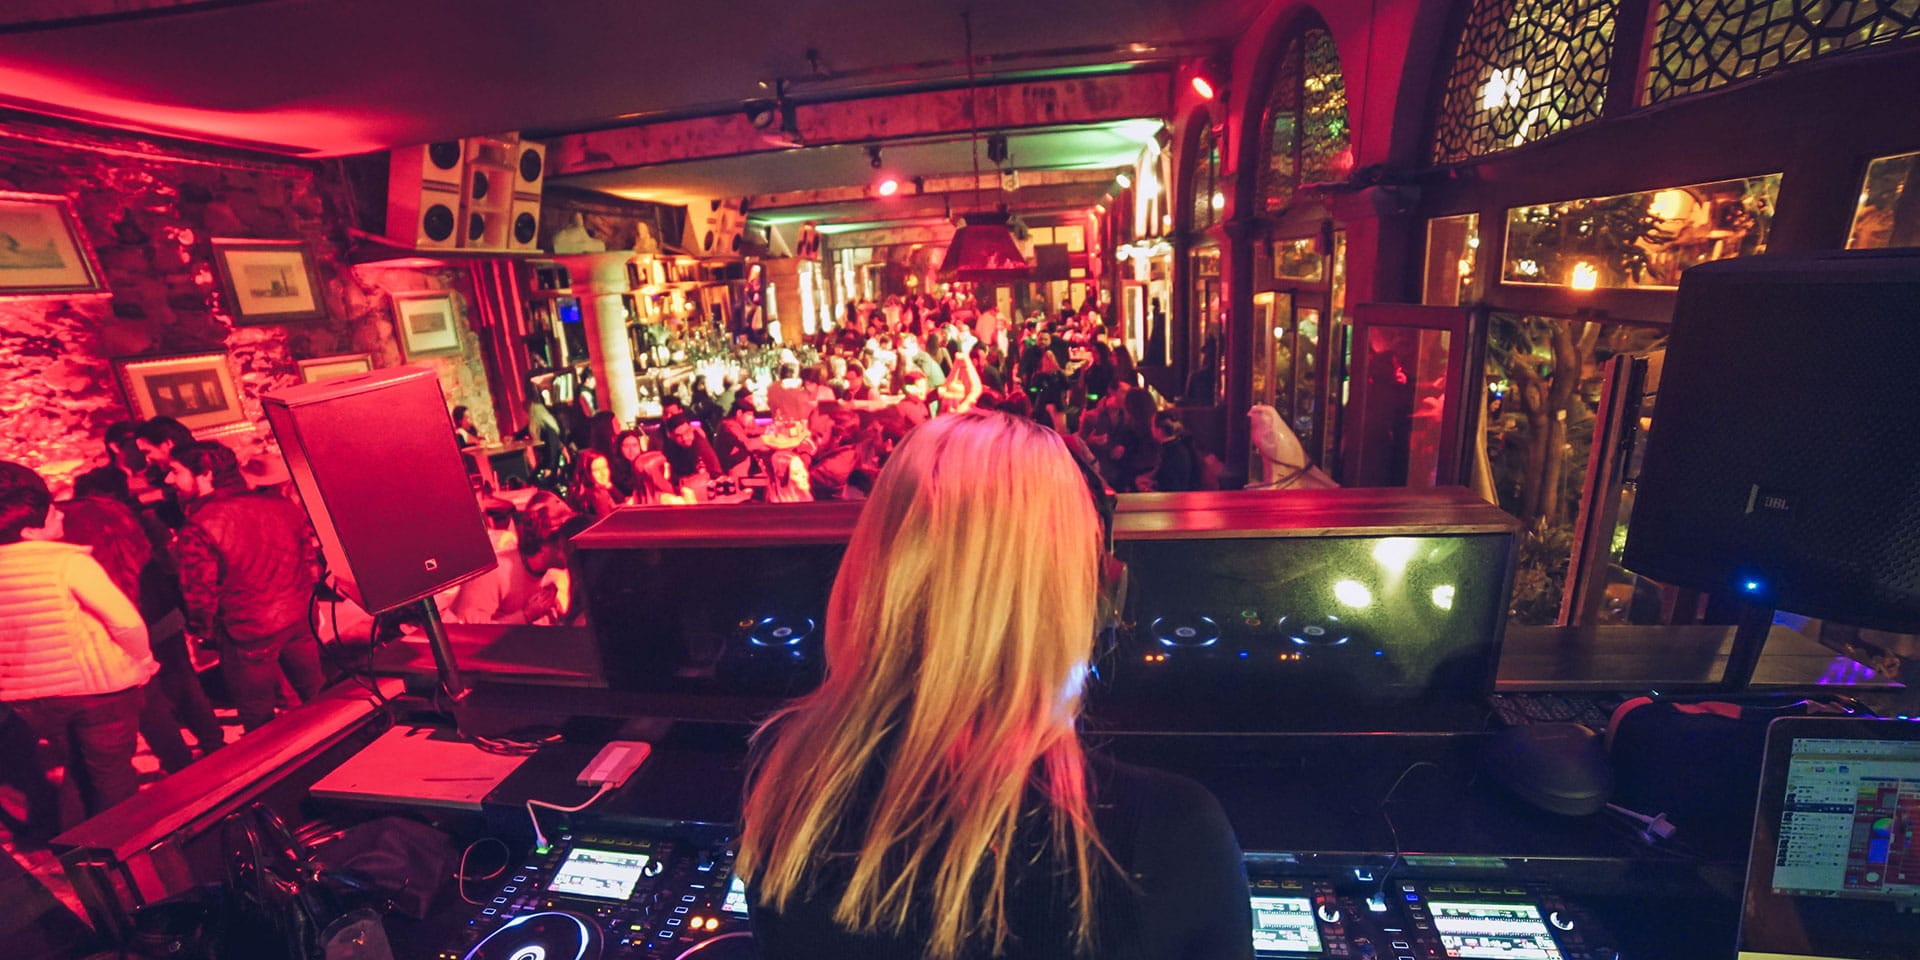 Top 6 night clubs in Dallas to spend perfect nightlife